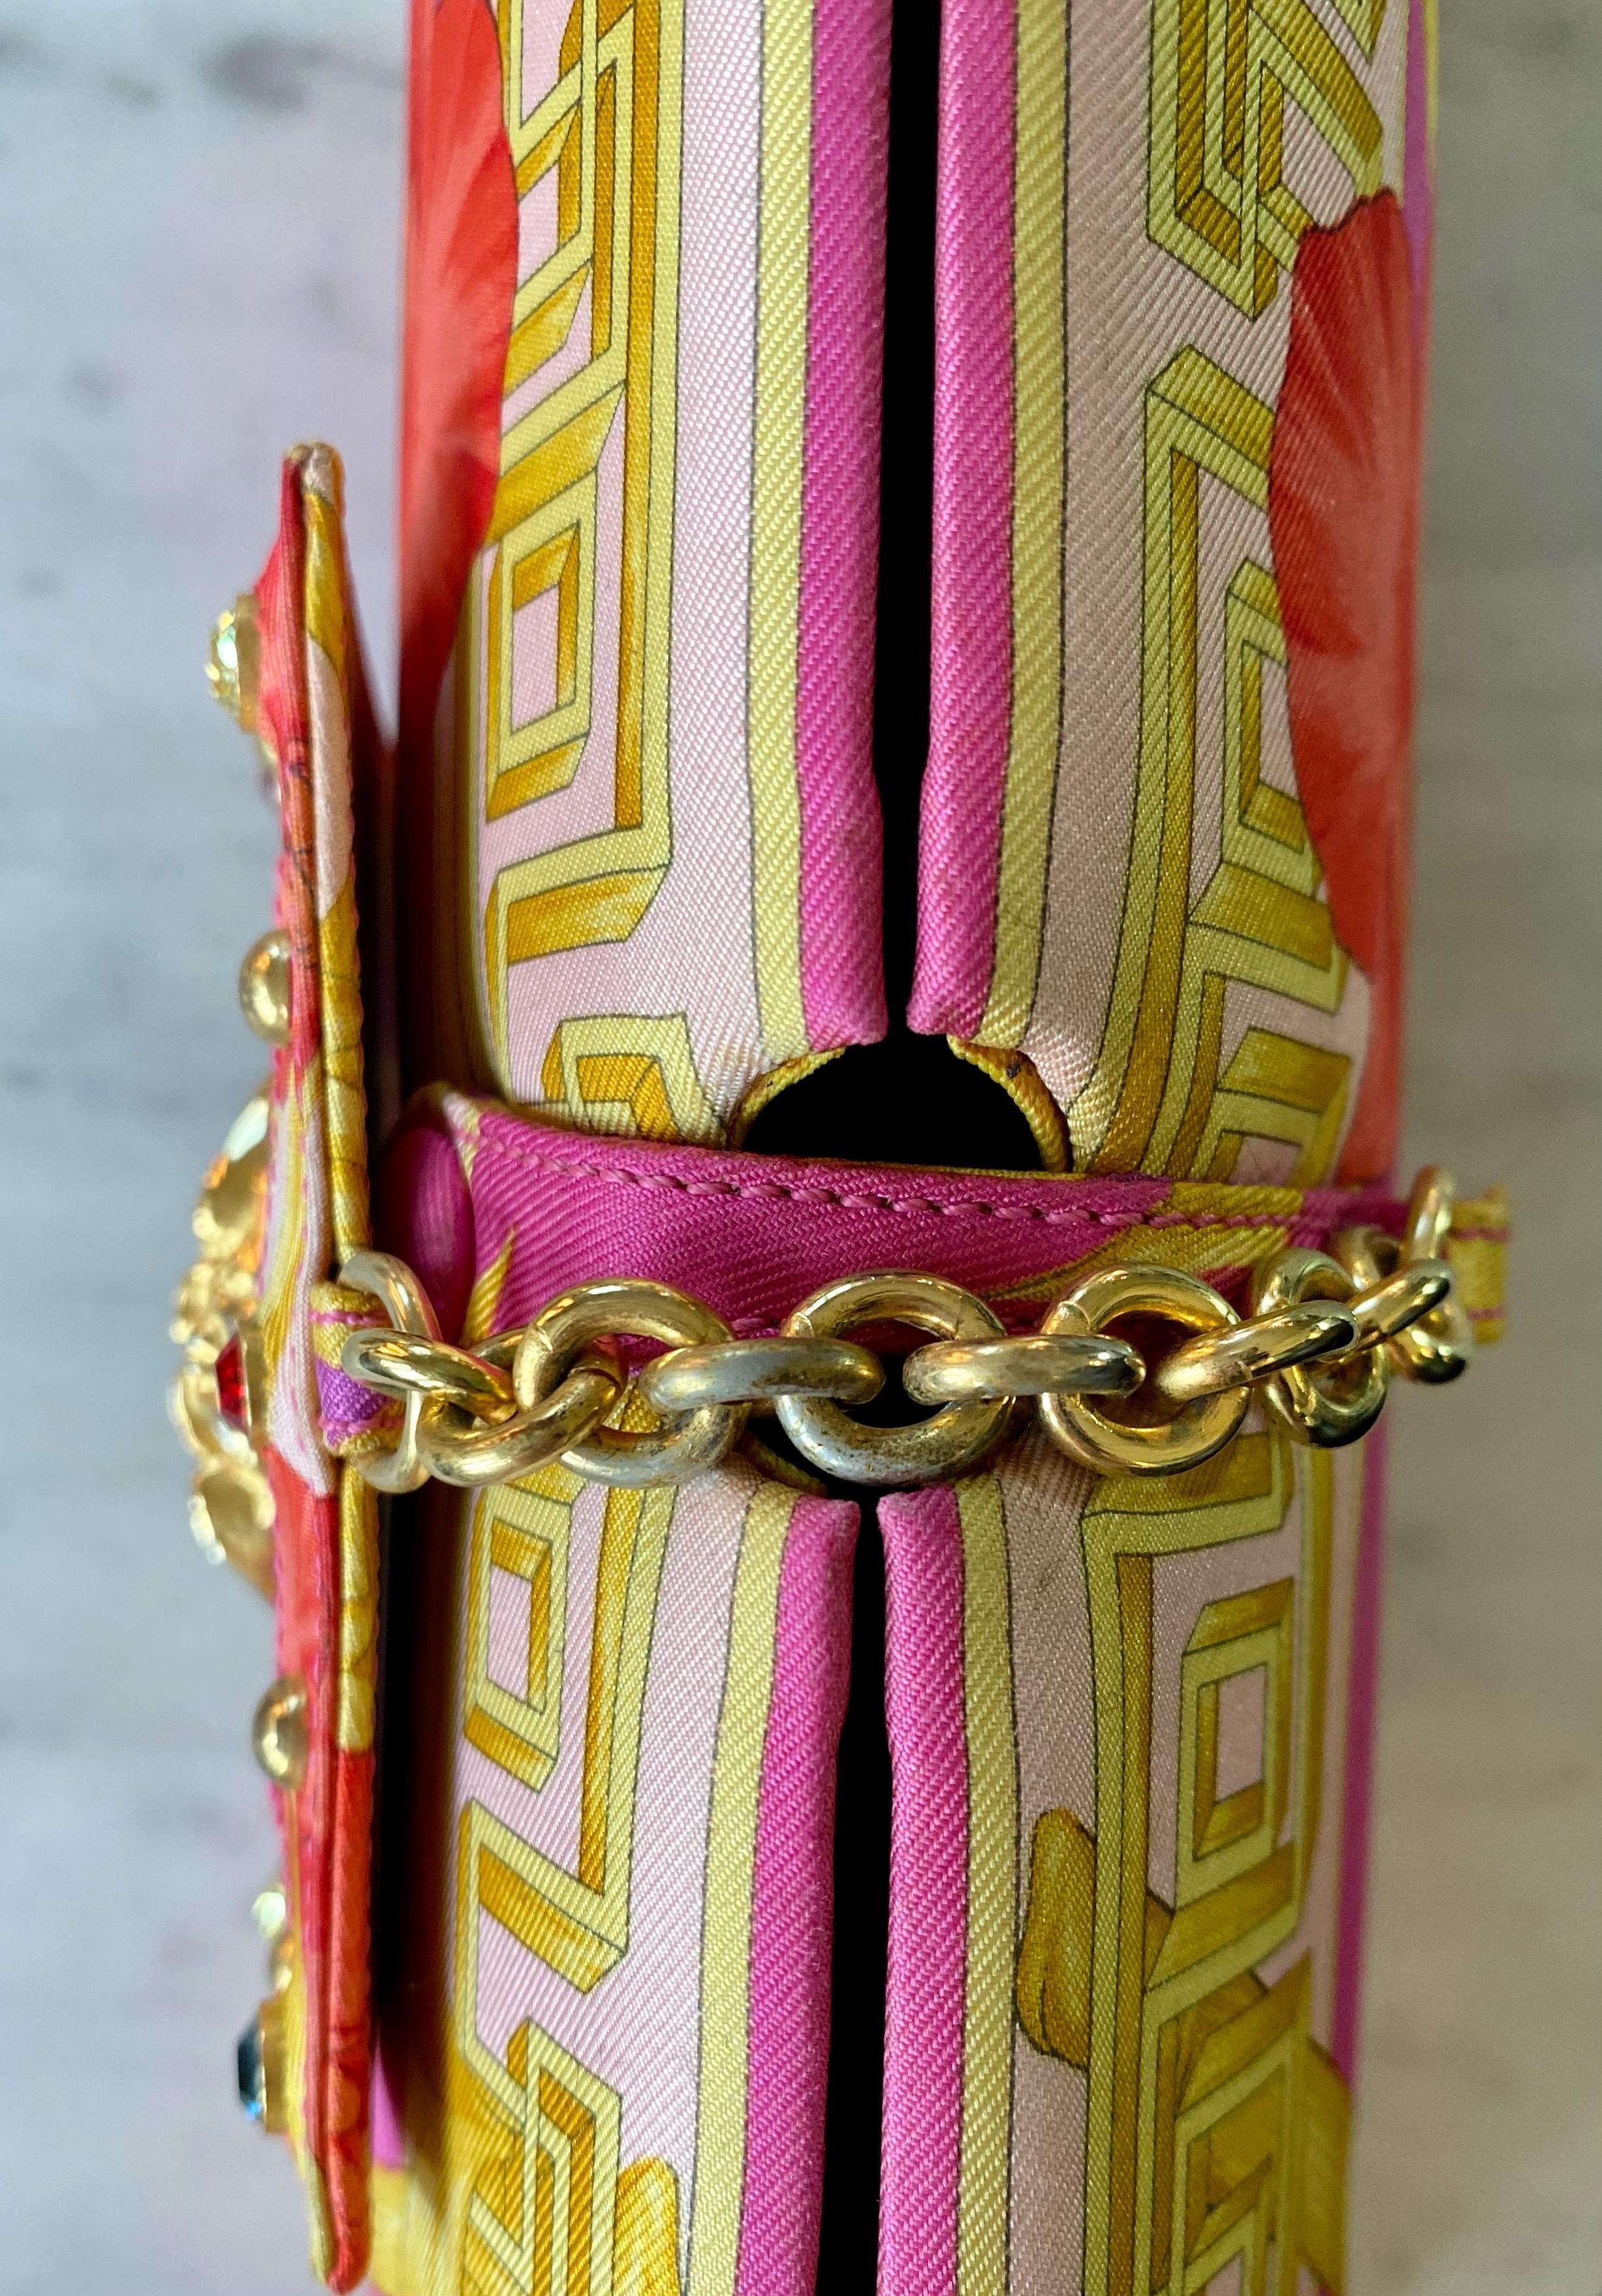 S/S 2000 Gianni Versace by Donatella Runway Pink Printed Silk Convertible Clutch For Sale 6